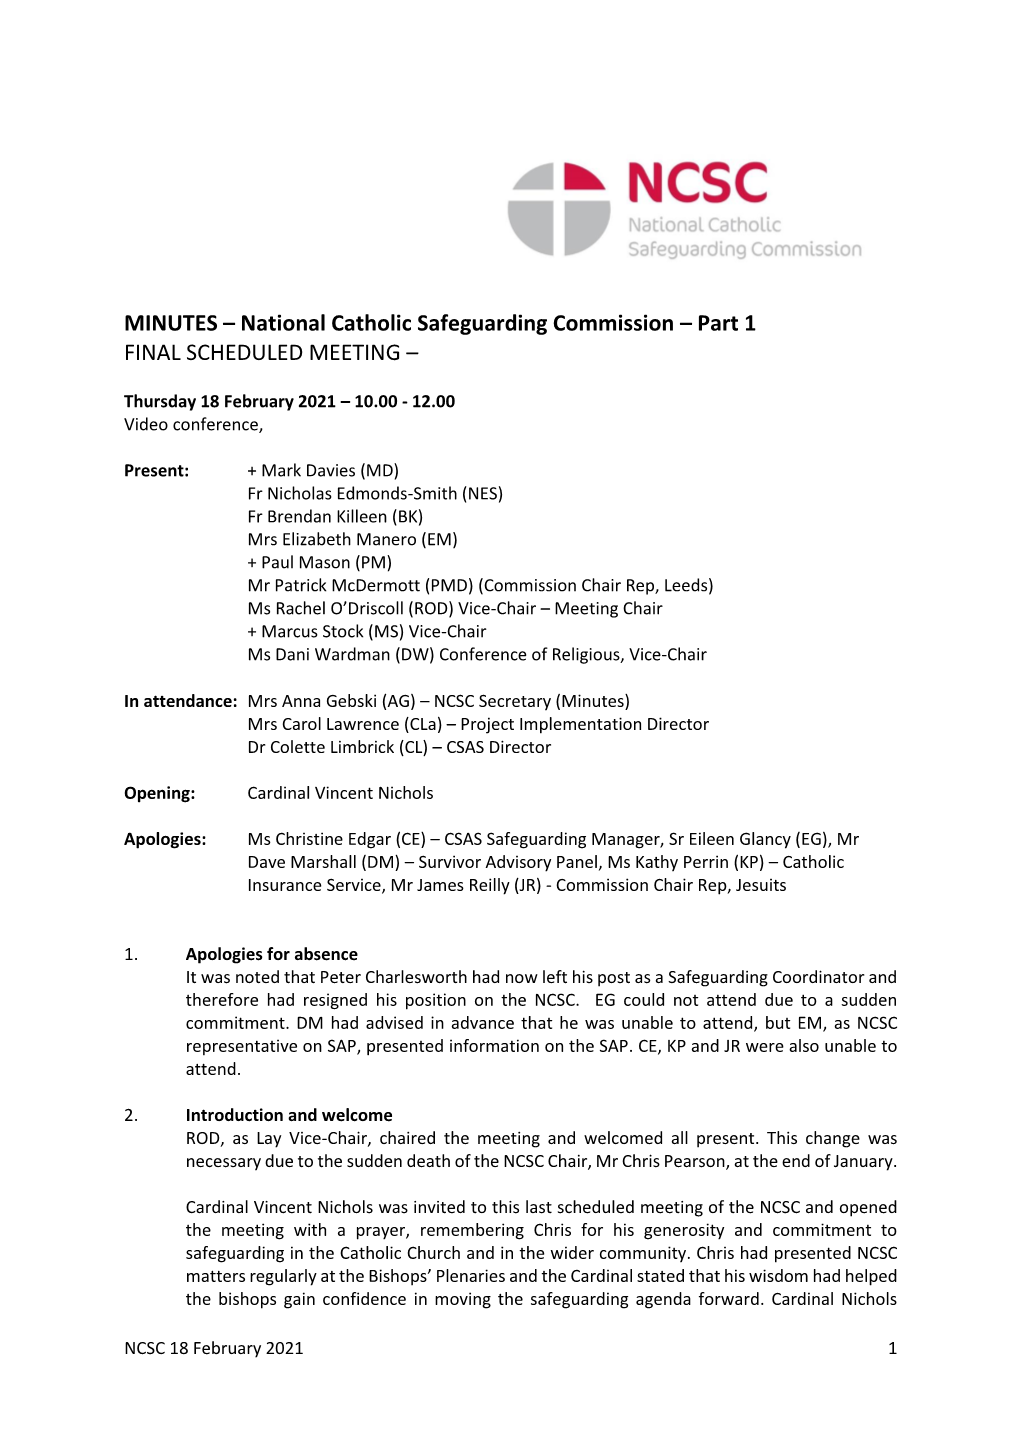 MINUTES – National Catholic Safeguarding Commission – Part 1 FINAL SCHEDULED MEETING –